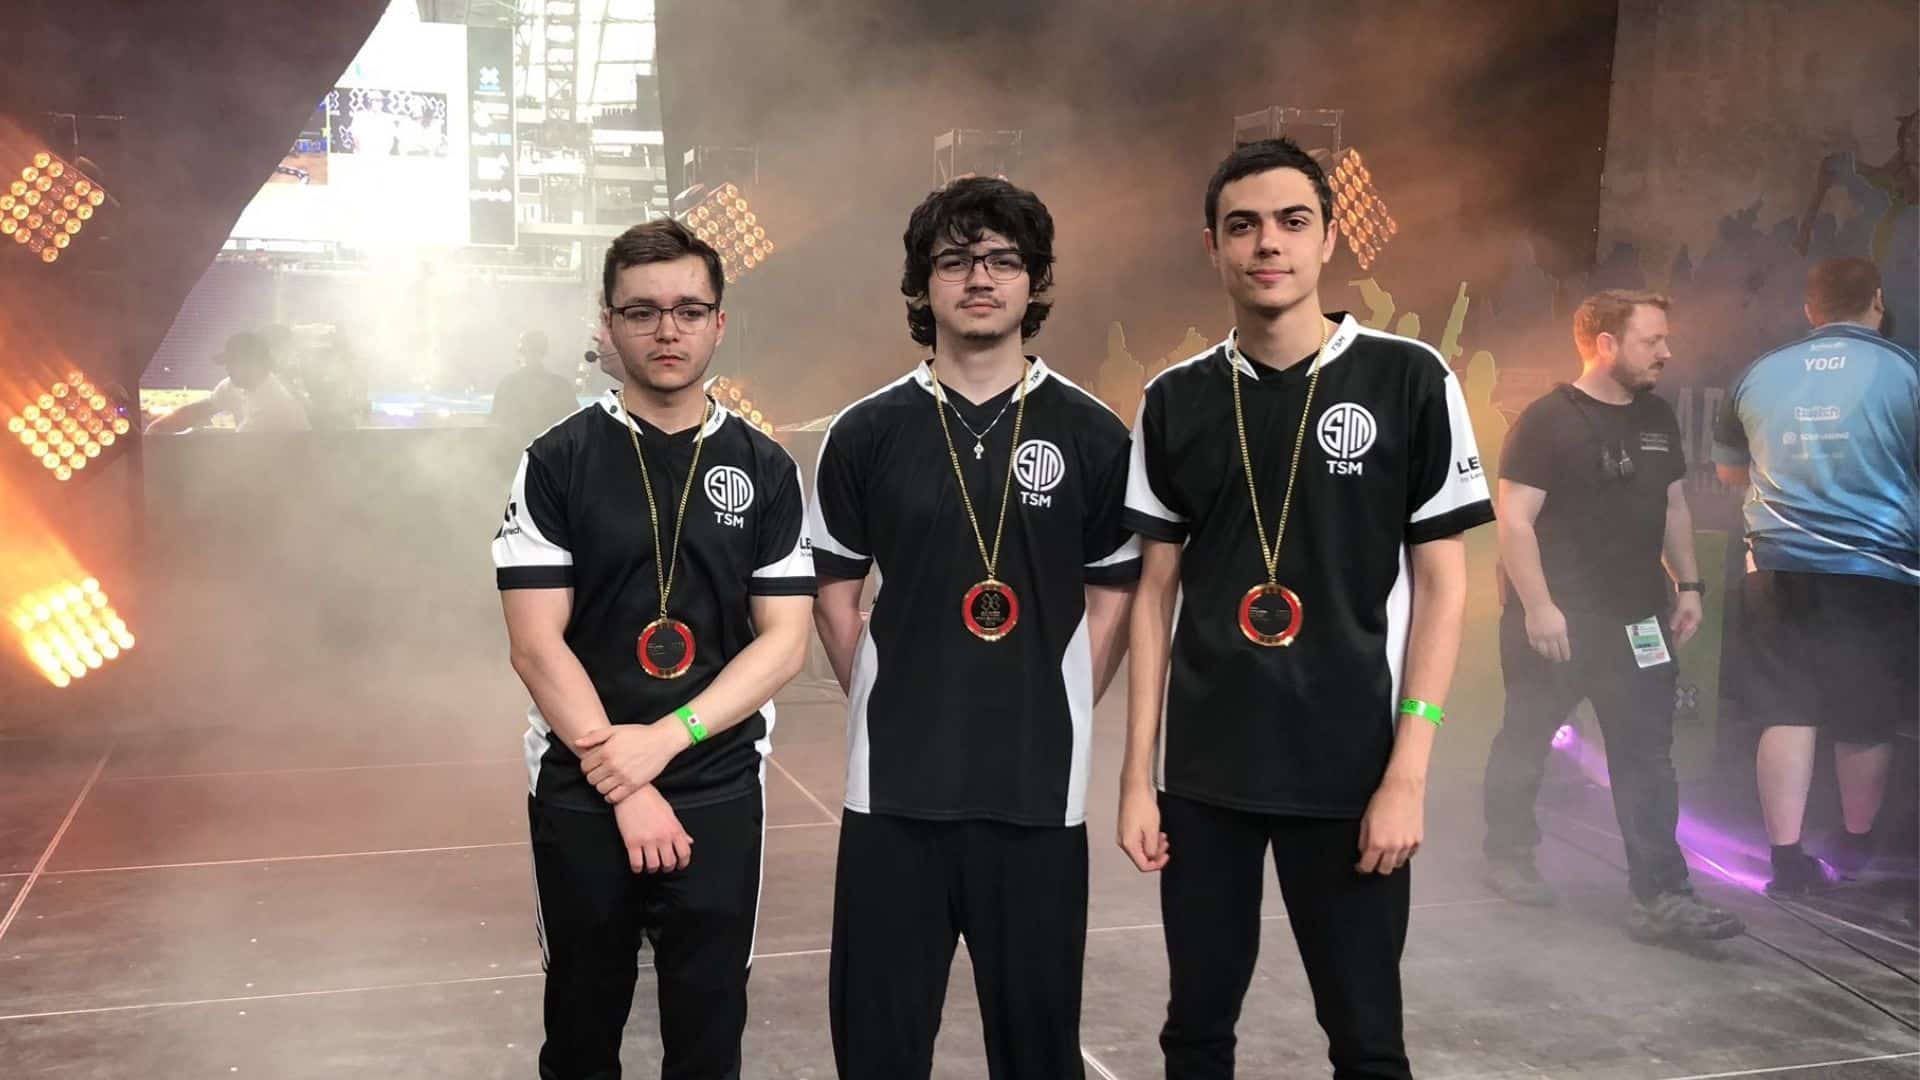 TSM Apex Legends roster with medals after event